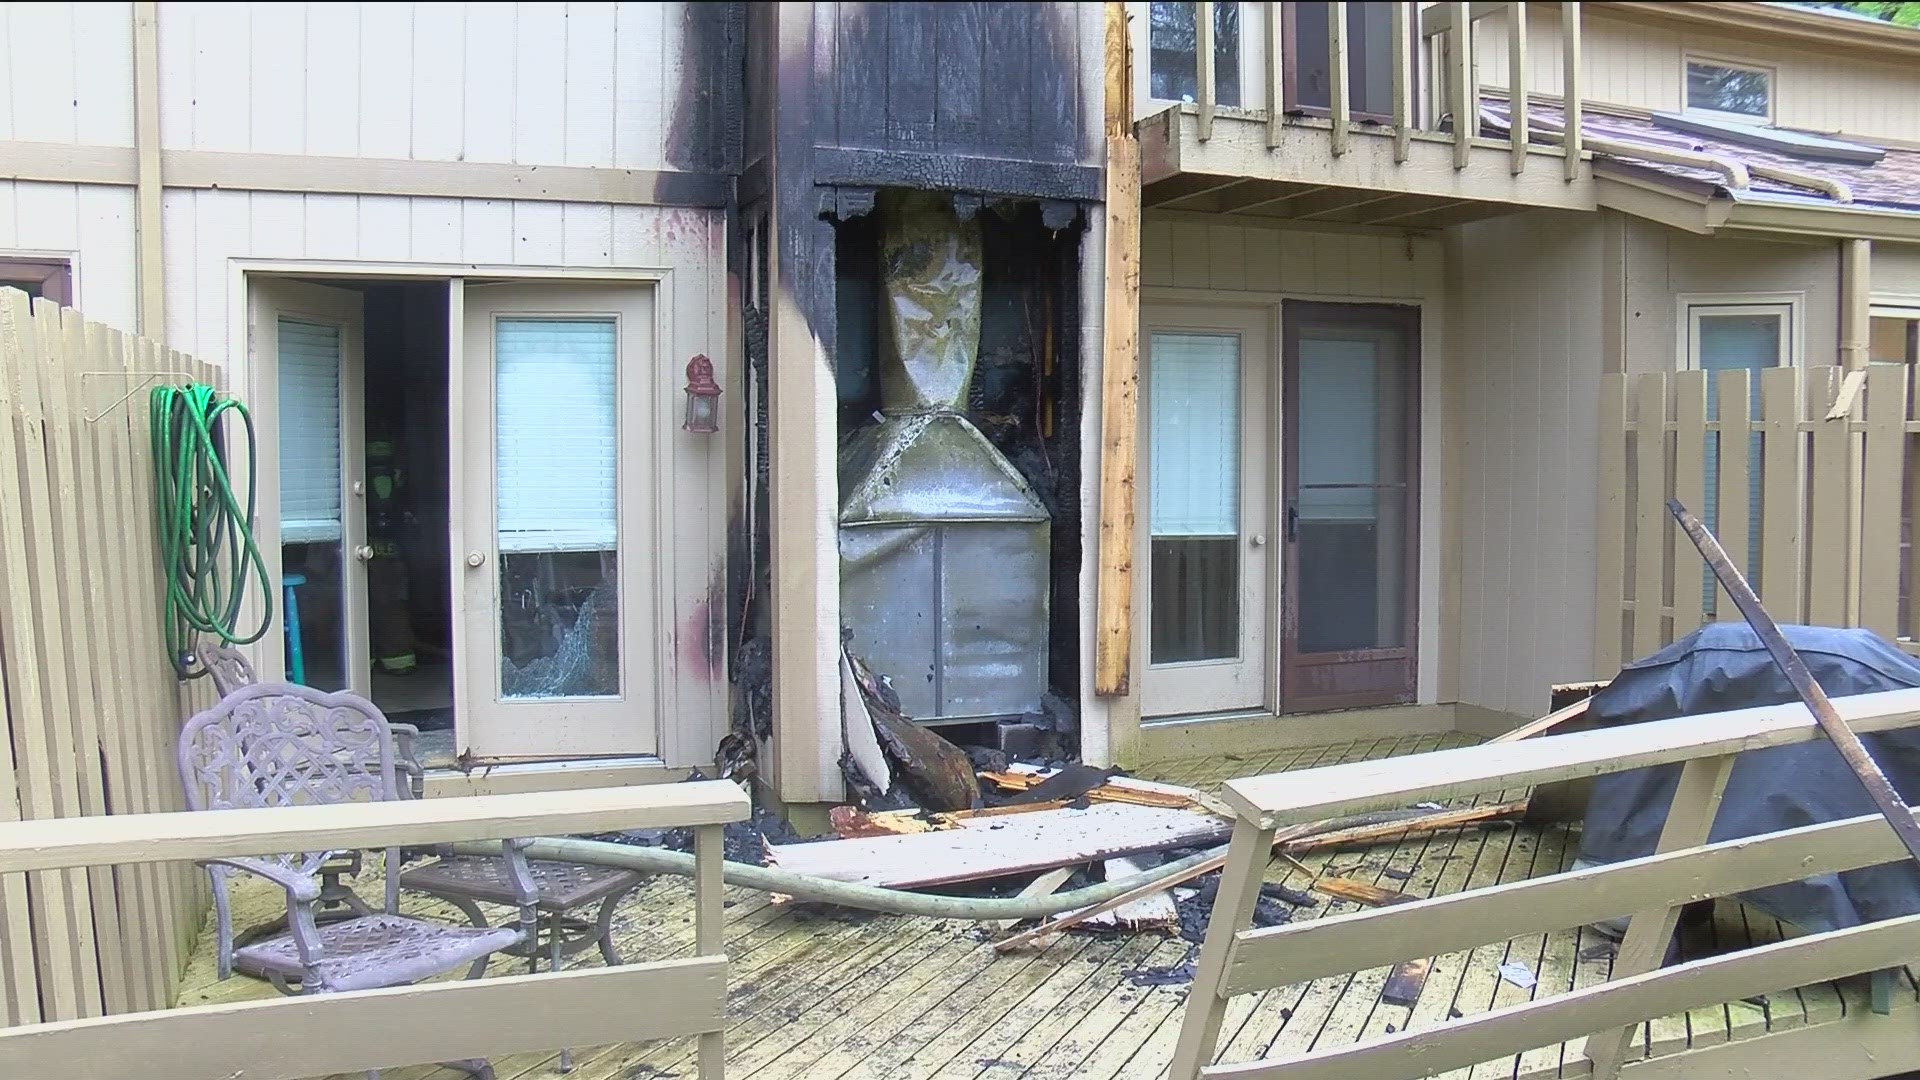 The Sylvania Fire Battalion Chief said no one was home at the time of the fire, and the damage was contained to the unit the fire started in.